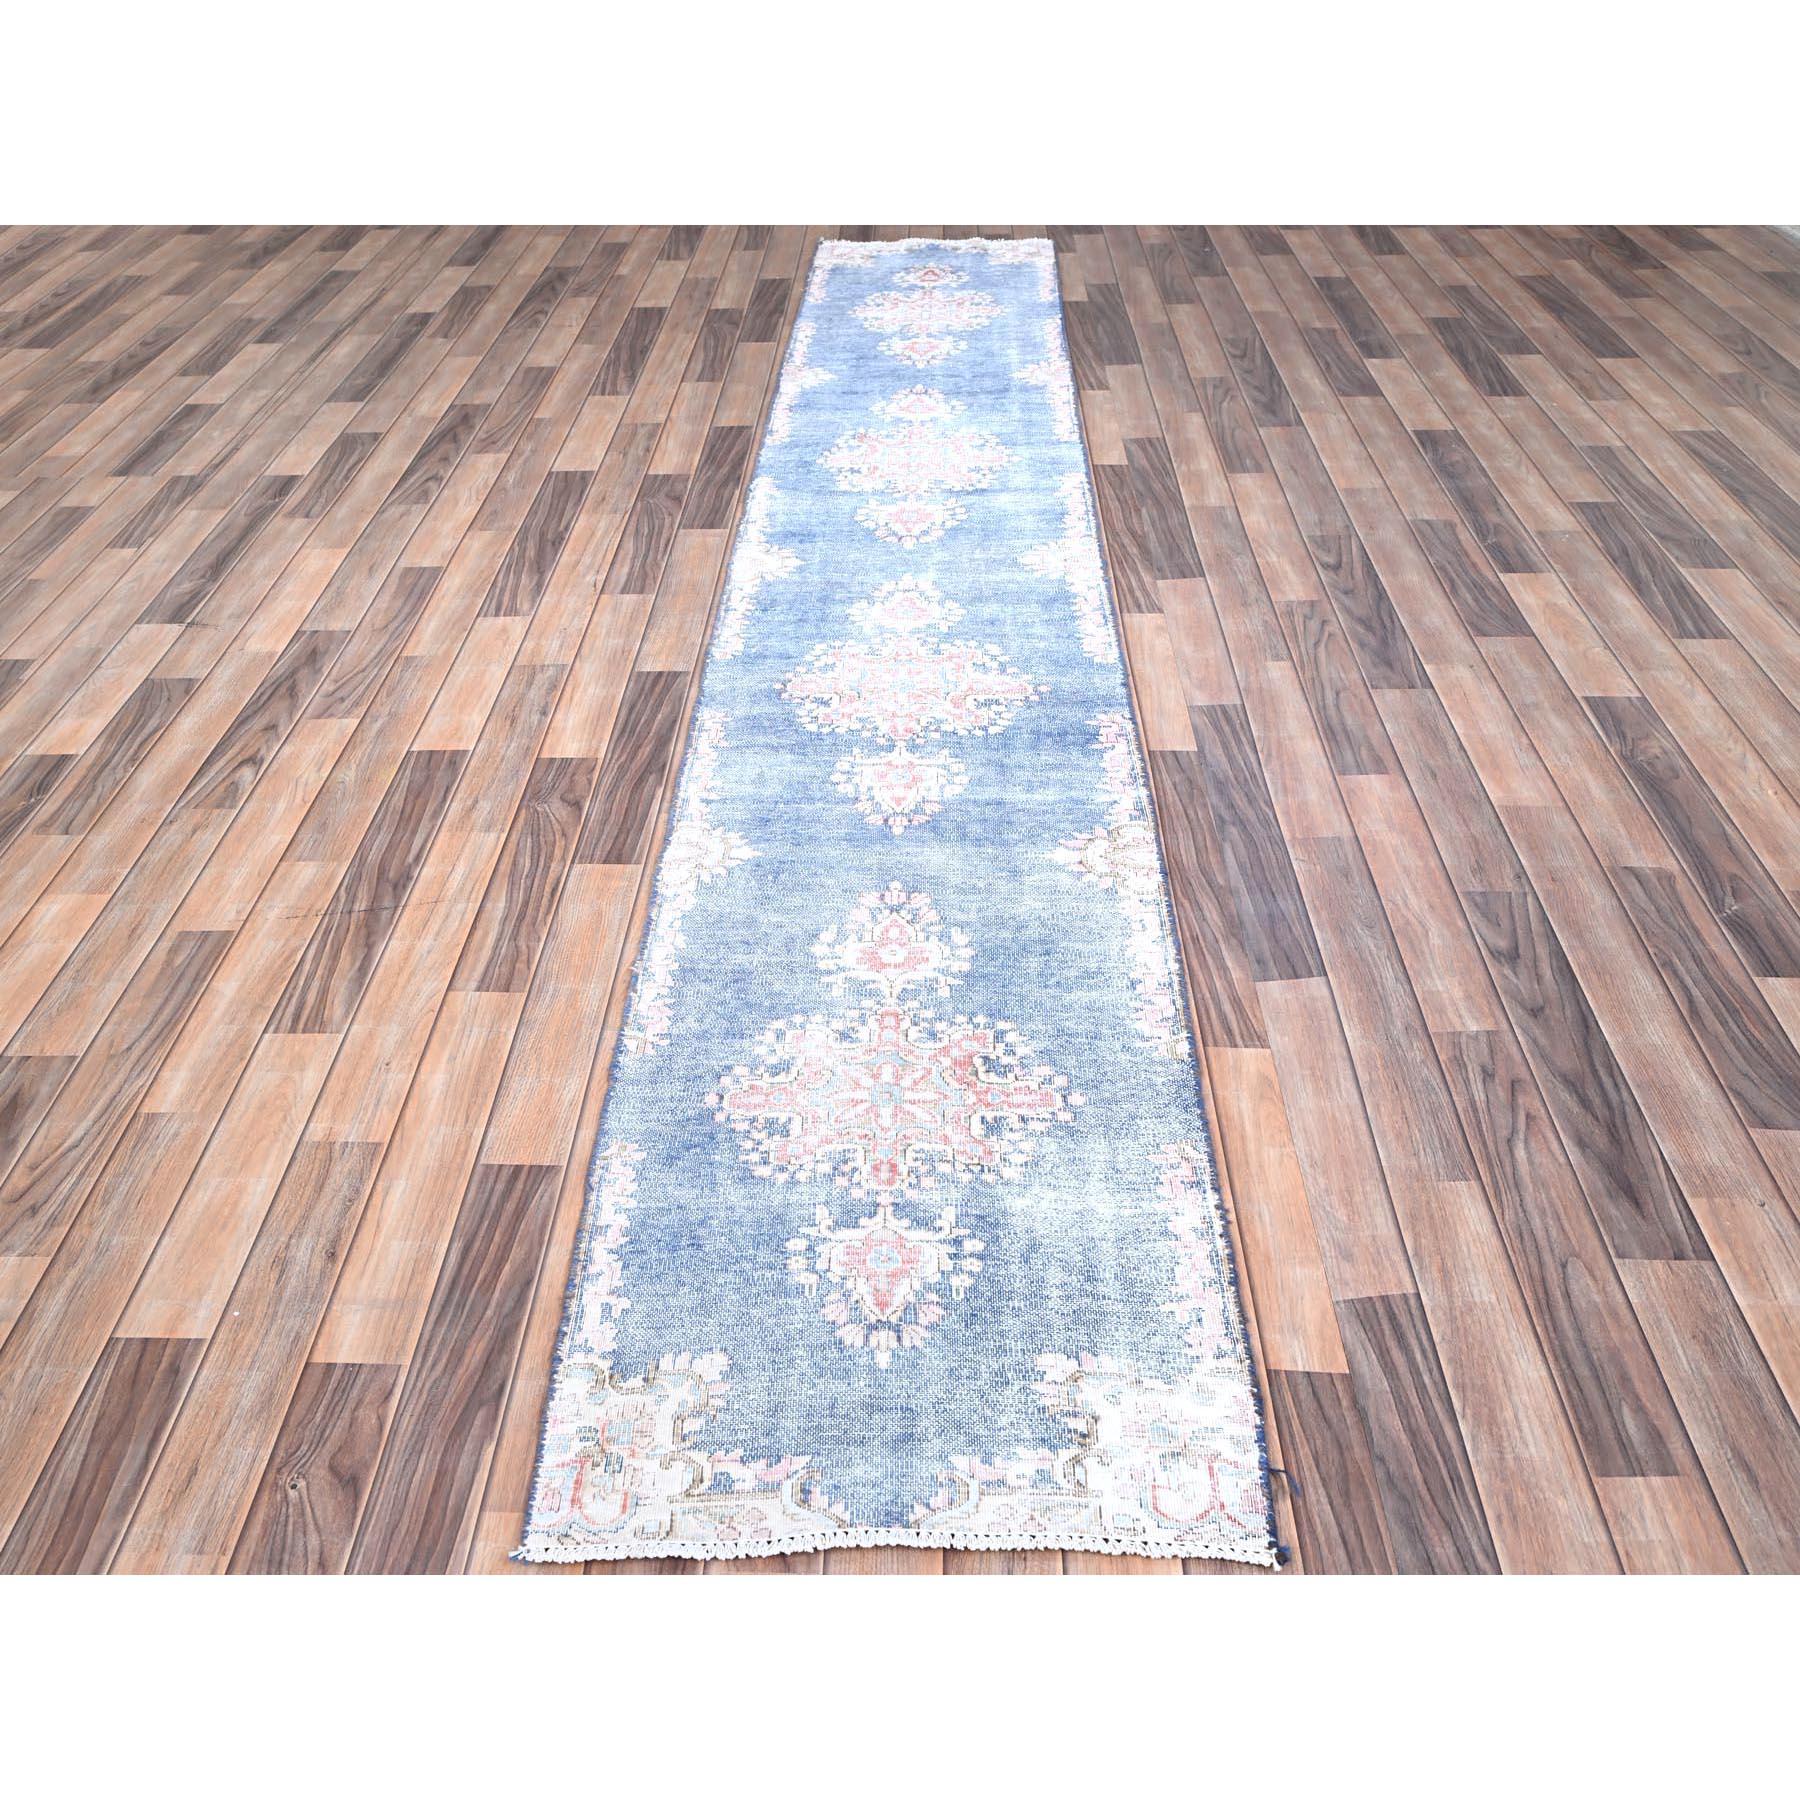 This fabulous Hand-Knotted carpet has been created and designed for extra strength and durability. This rug has been handcrafted for weeks in the traditional method that is used to make
Exact Rug Size in Feet and Inches : 2'1